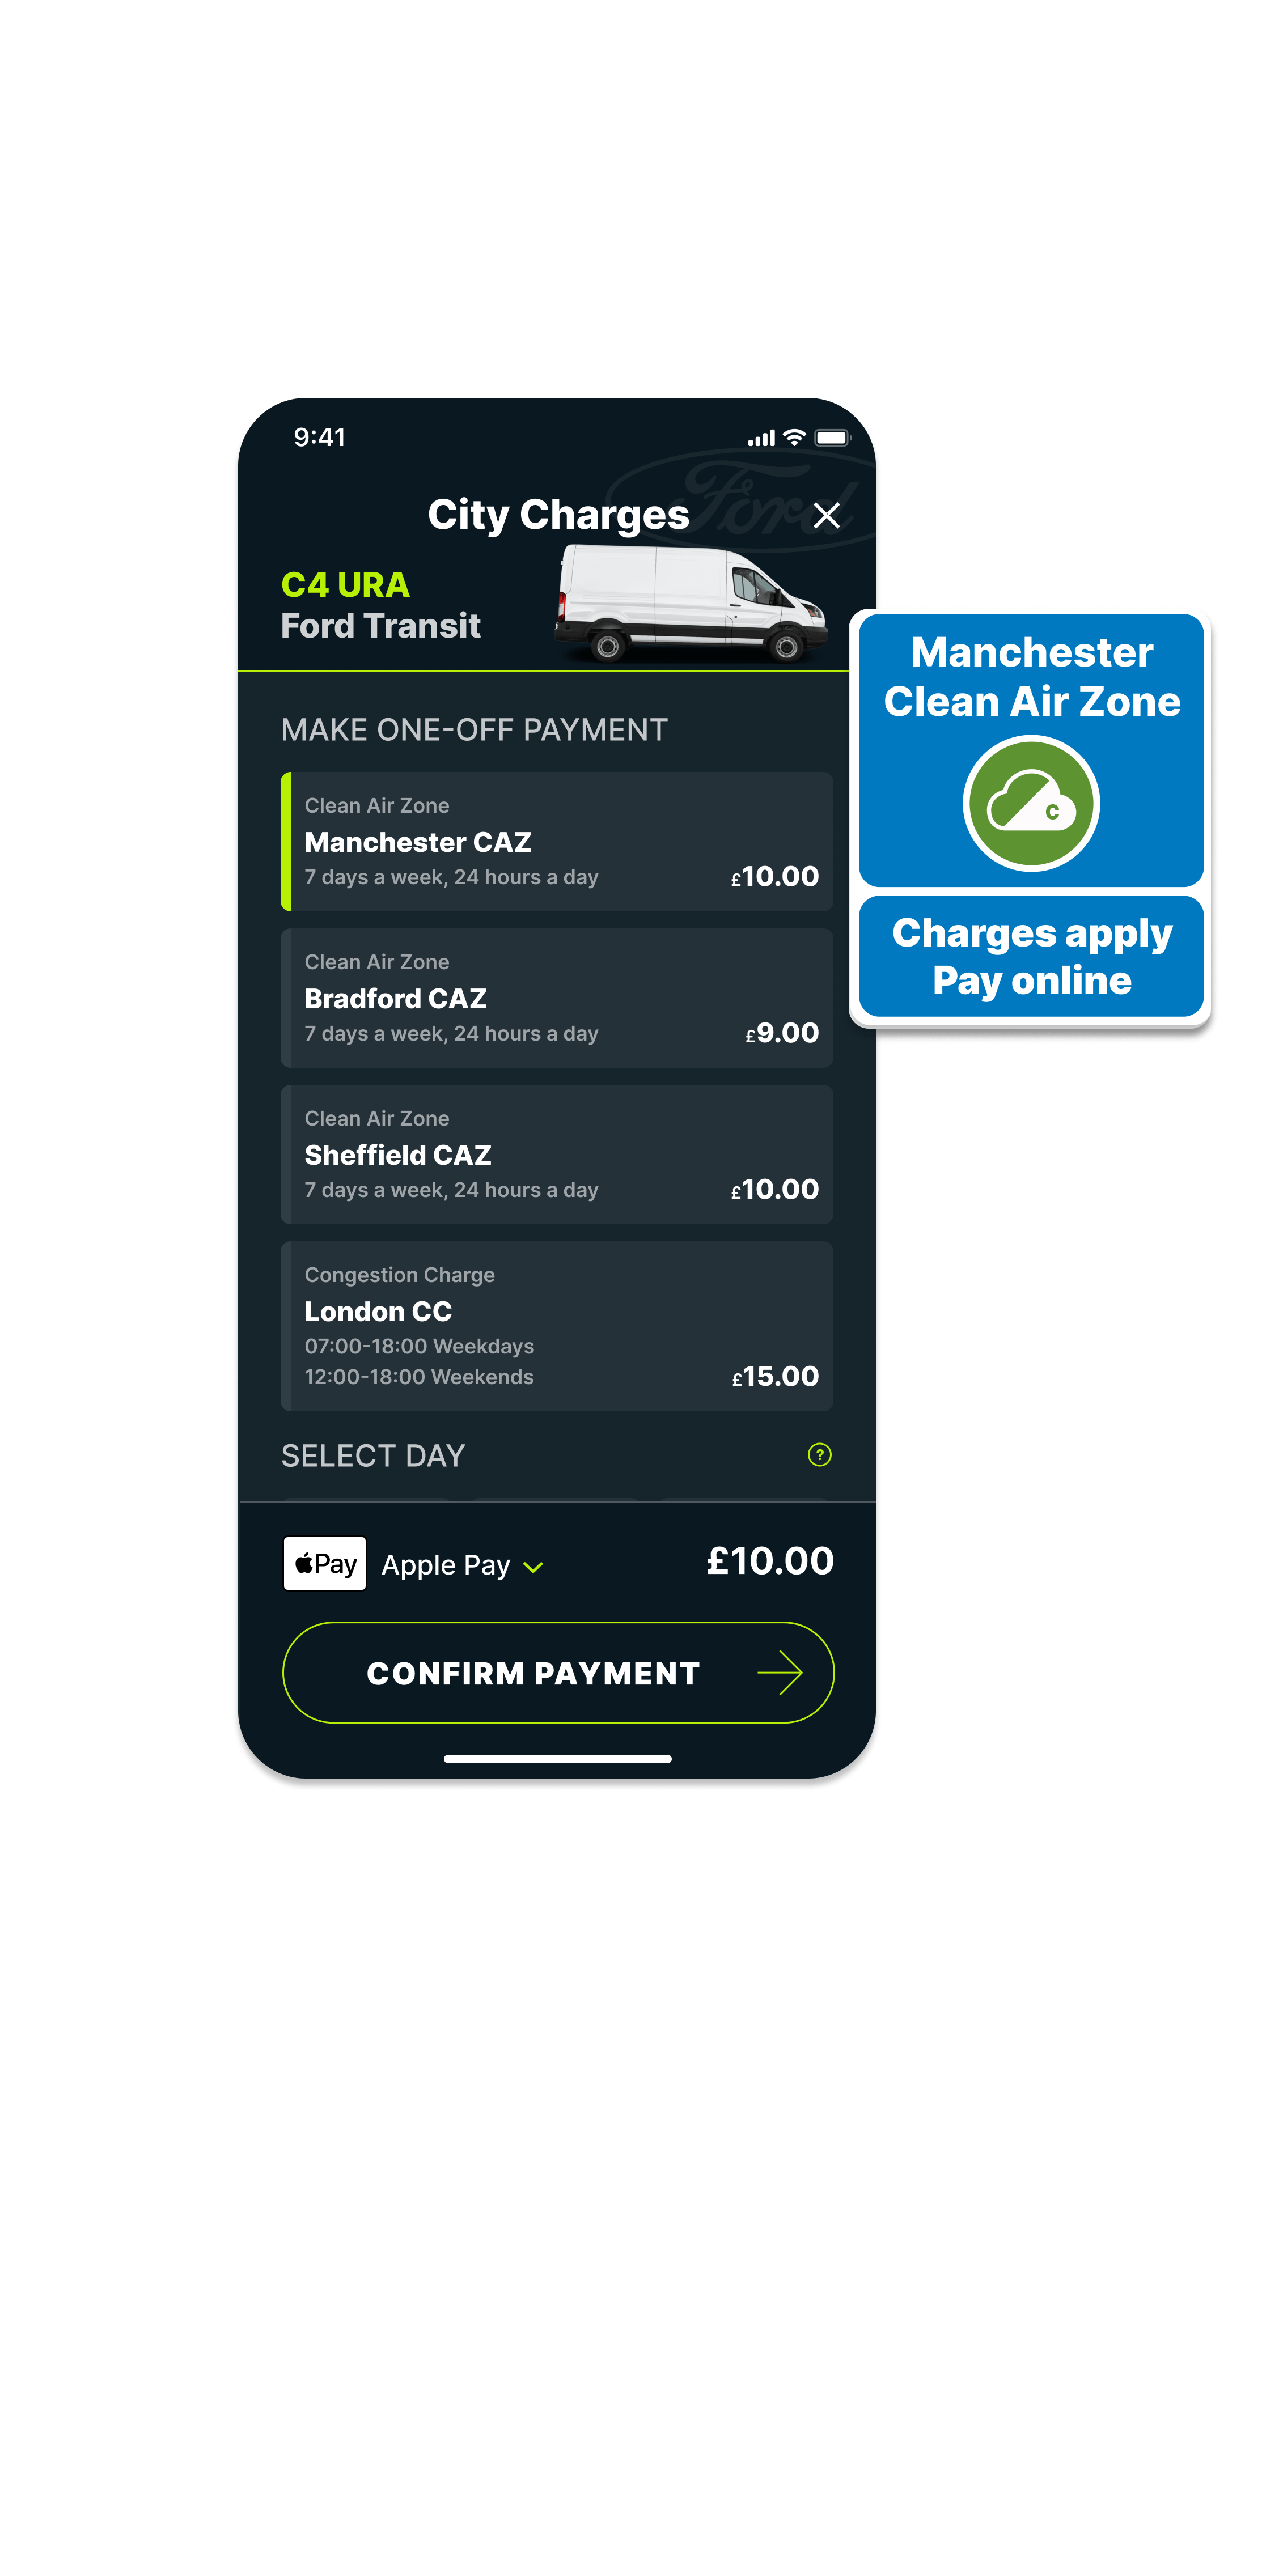 Caura app screen showing the Manchester CAZ charge in-app as well as CAZ road sign